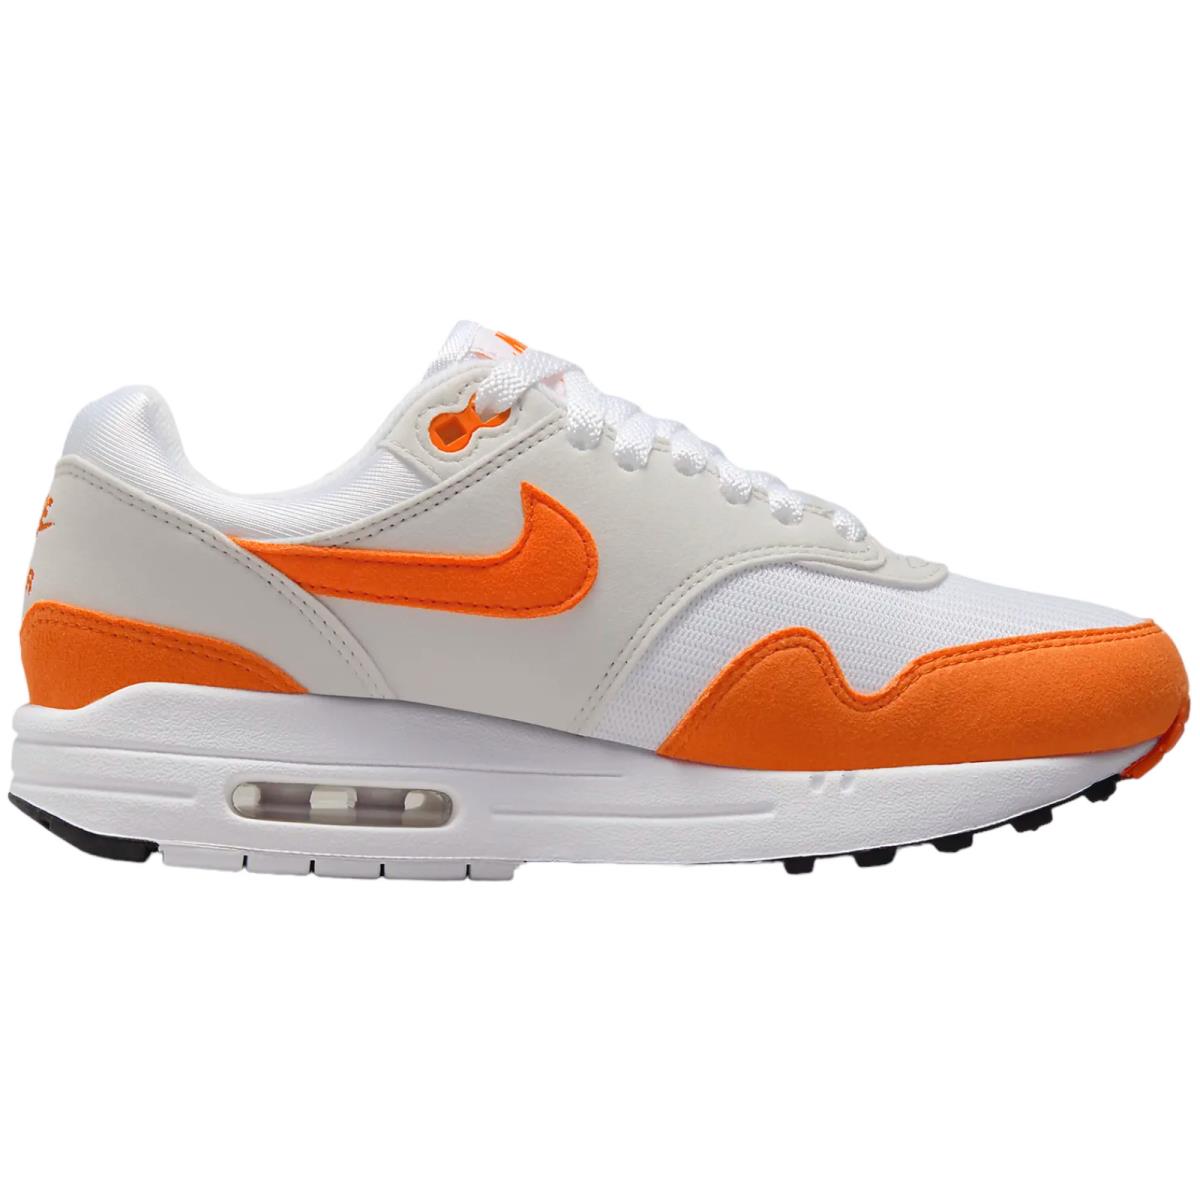 Nike Air Max 1 Women`s Casual Shoes All Colors US Sizes 6-11 Neutral Grey/White/Black/Safety Orange